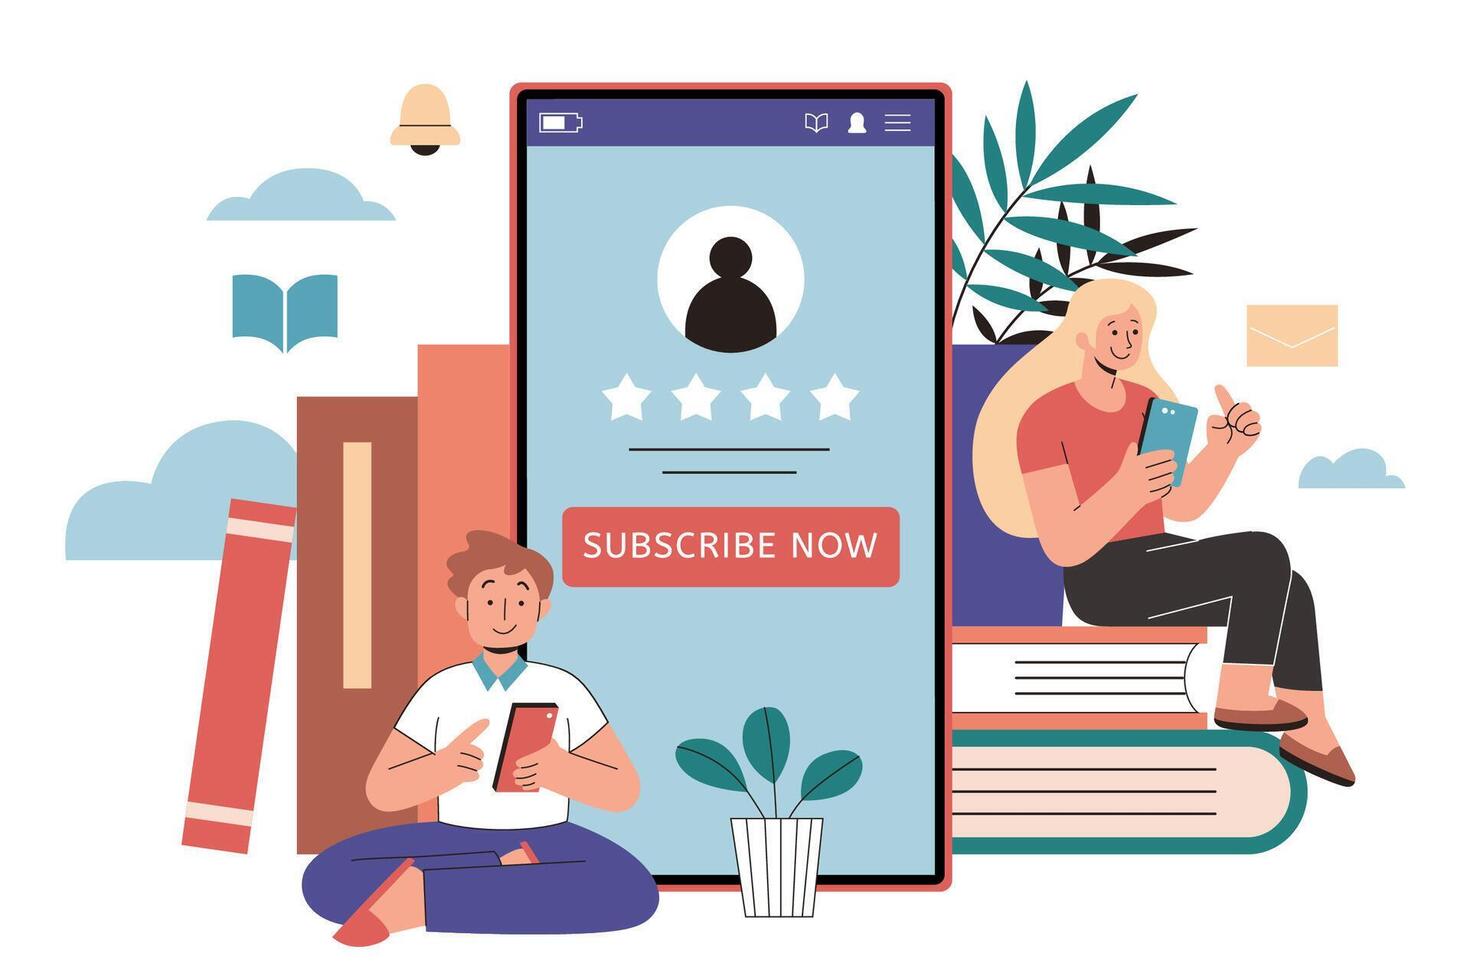 Educational content subscription in flat style illustration. Boy and girl using mobile phones while sitting by books, and subscription CTA to shown to their phone screens vector